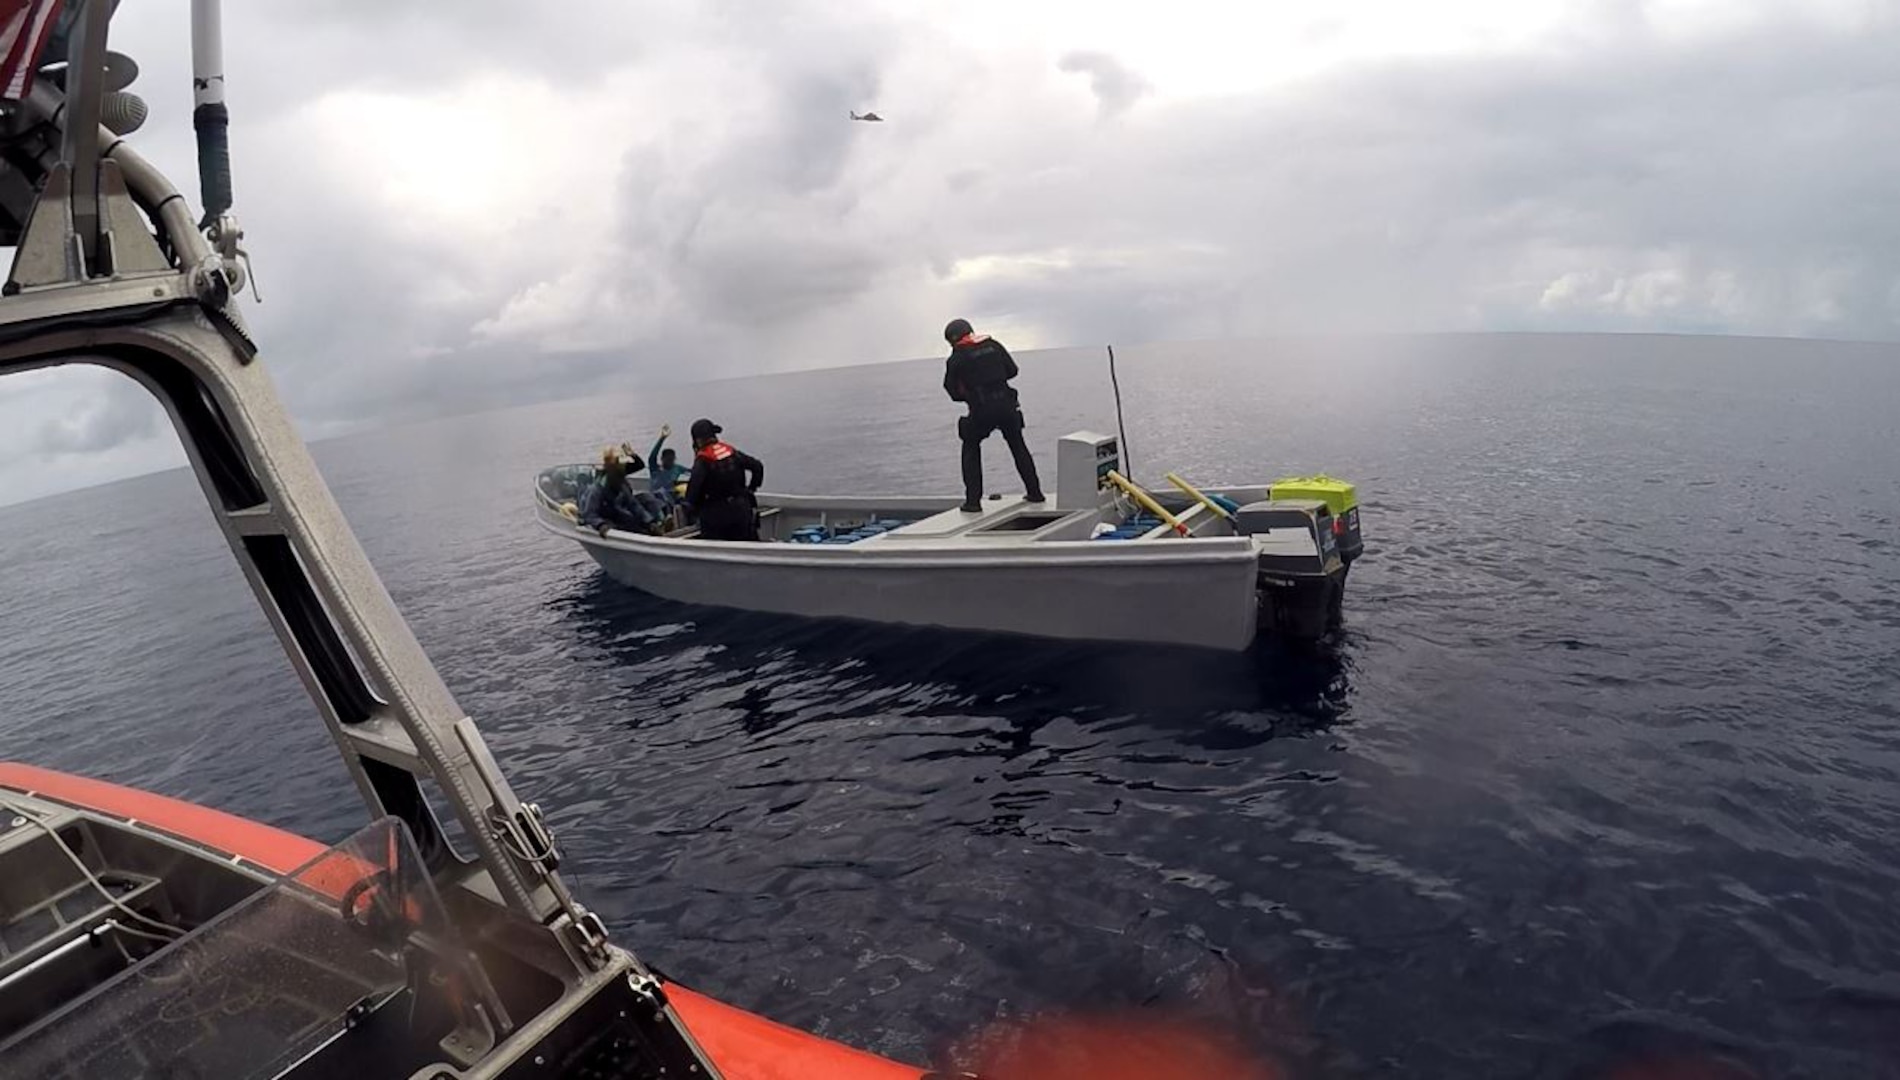 Boarding team members from the Coast Guard Cutter Mohawk interdict suspected smugglers in the Eastern Pacific in February, 2017. (US Coast Guard photo)